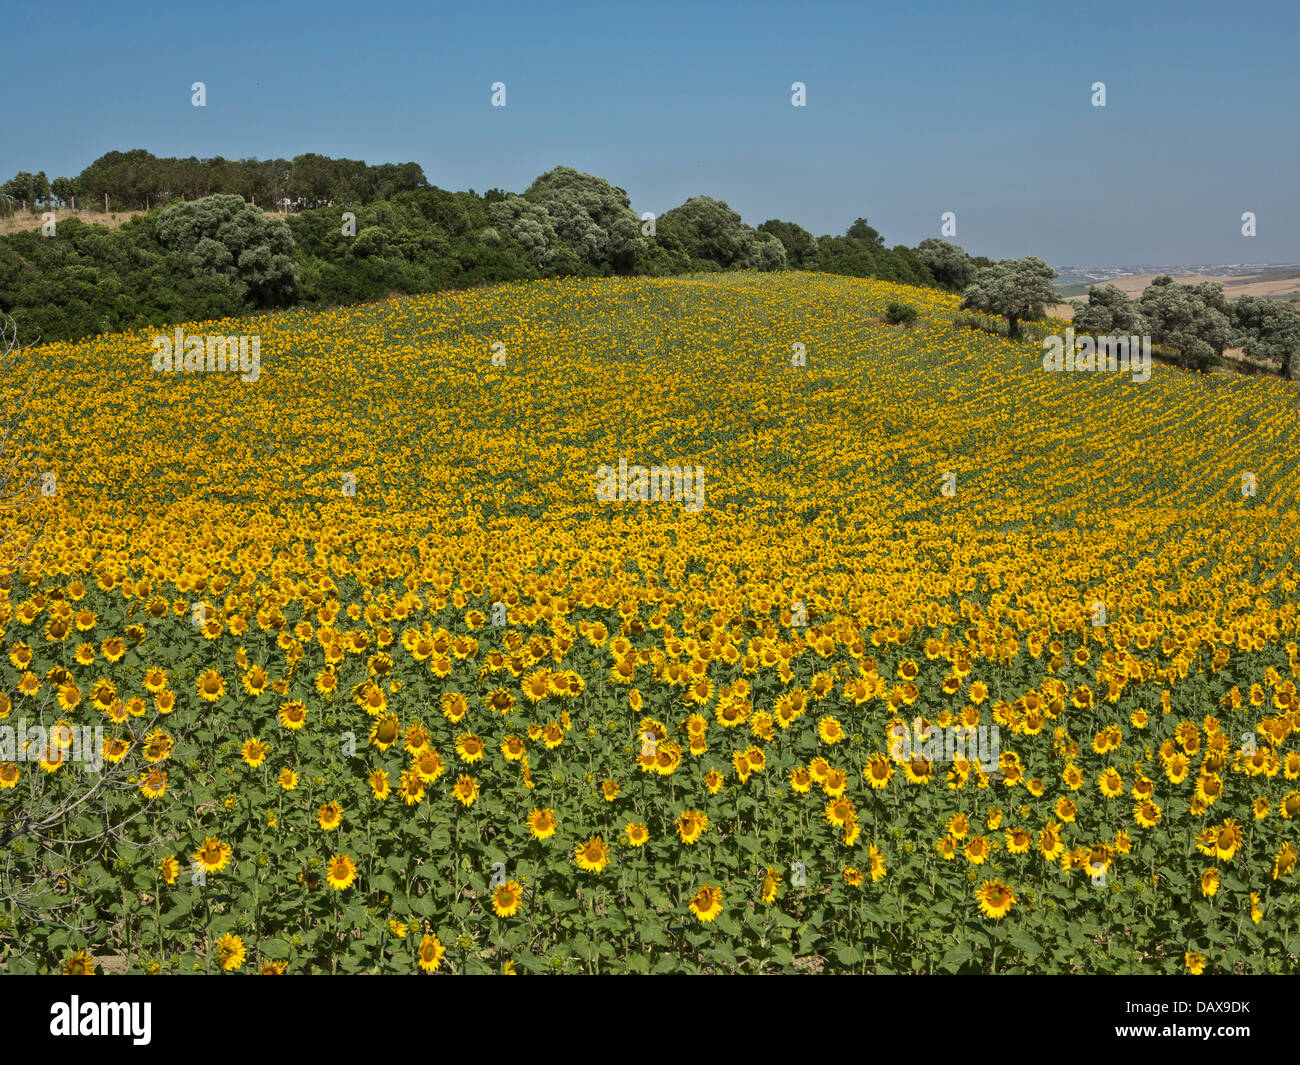 Sunflower fields harvested to make cooking oil. Andalucia, Spain Stock Photo